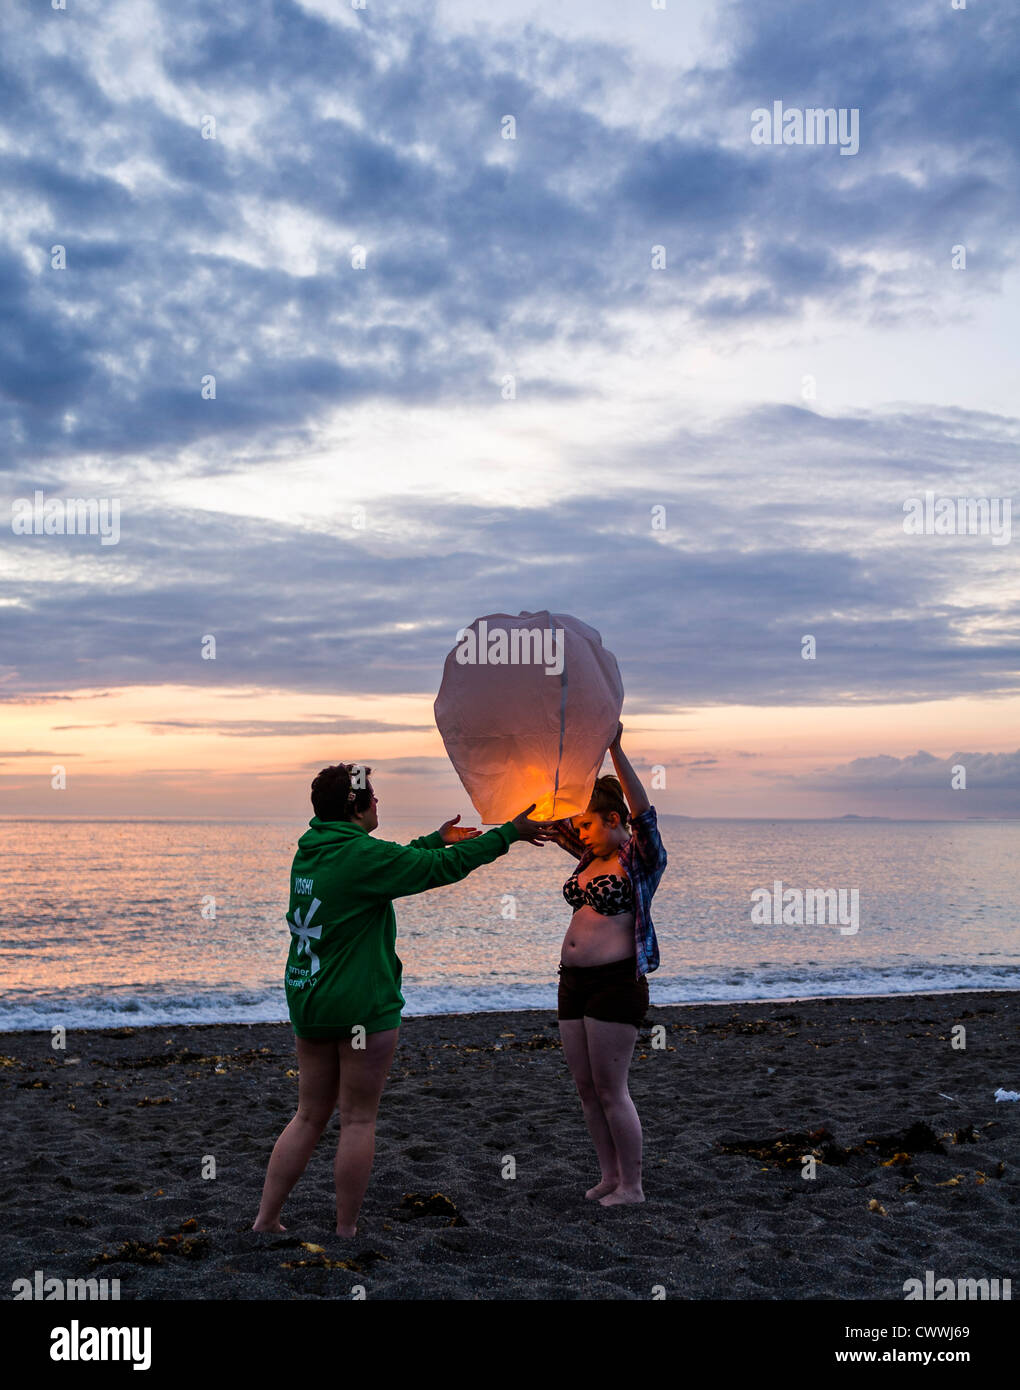 Summer evening : A young couple setting off a chinese paper lantern on the beach at dusk Aberystwyth Wales Uk Stock Photo